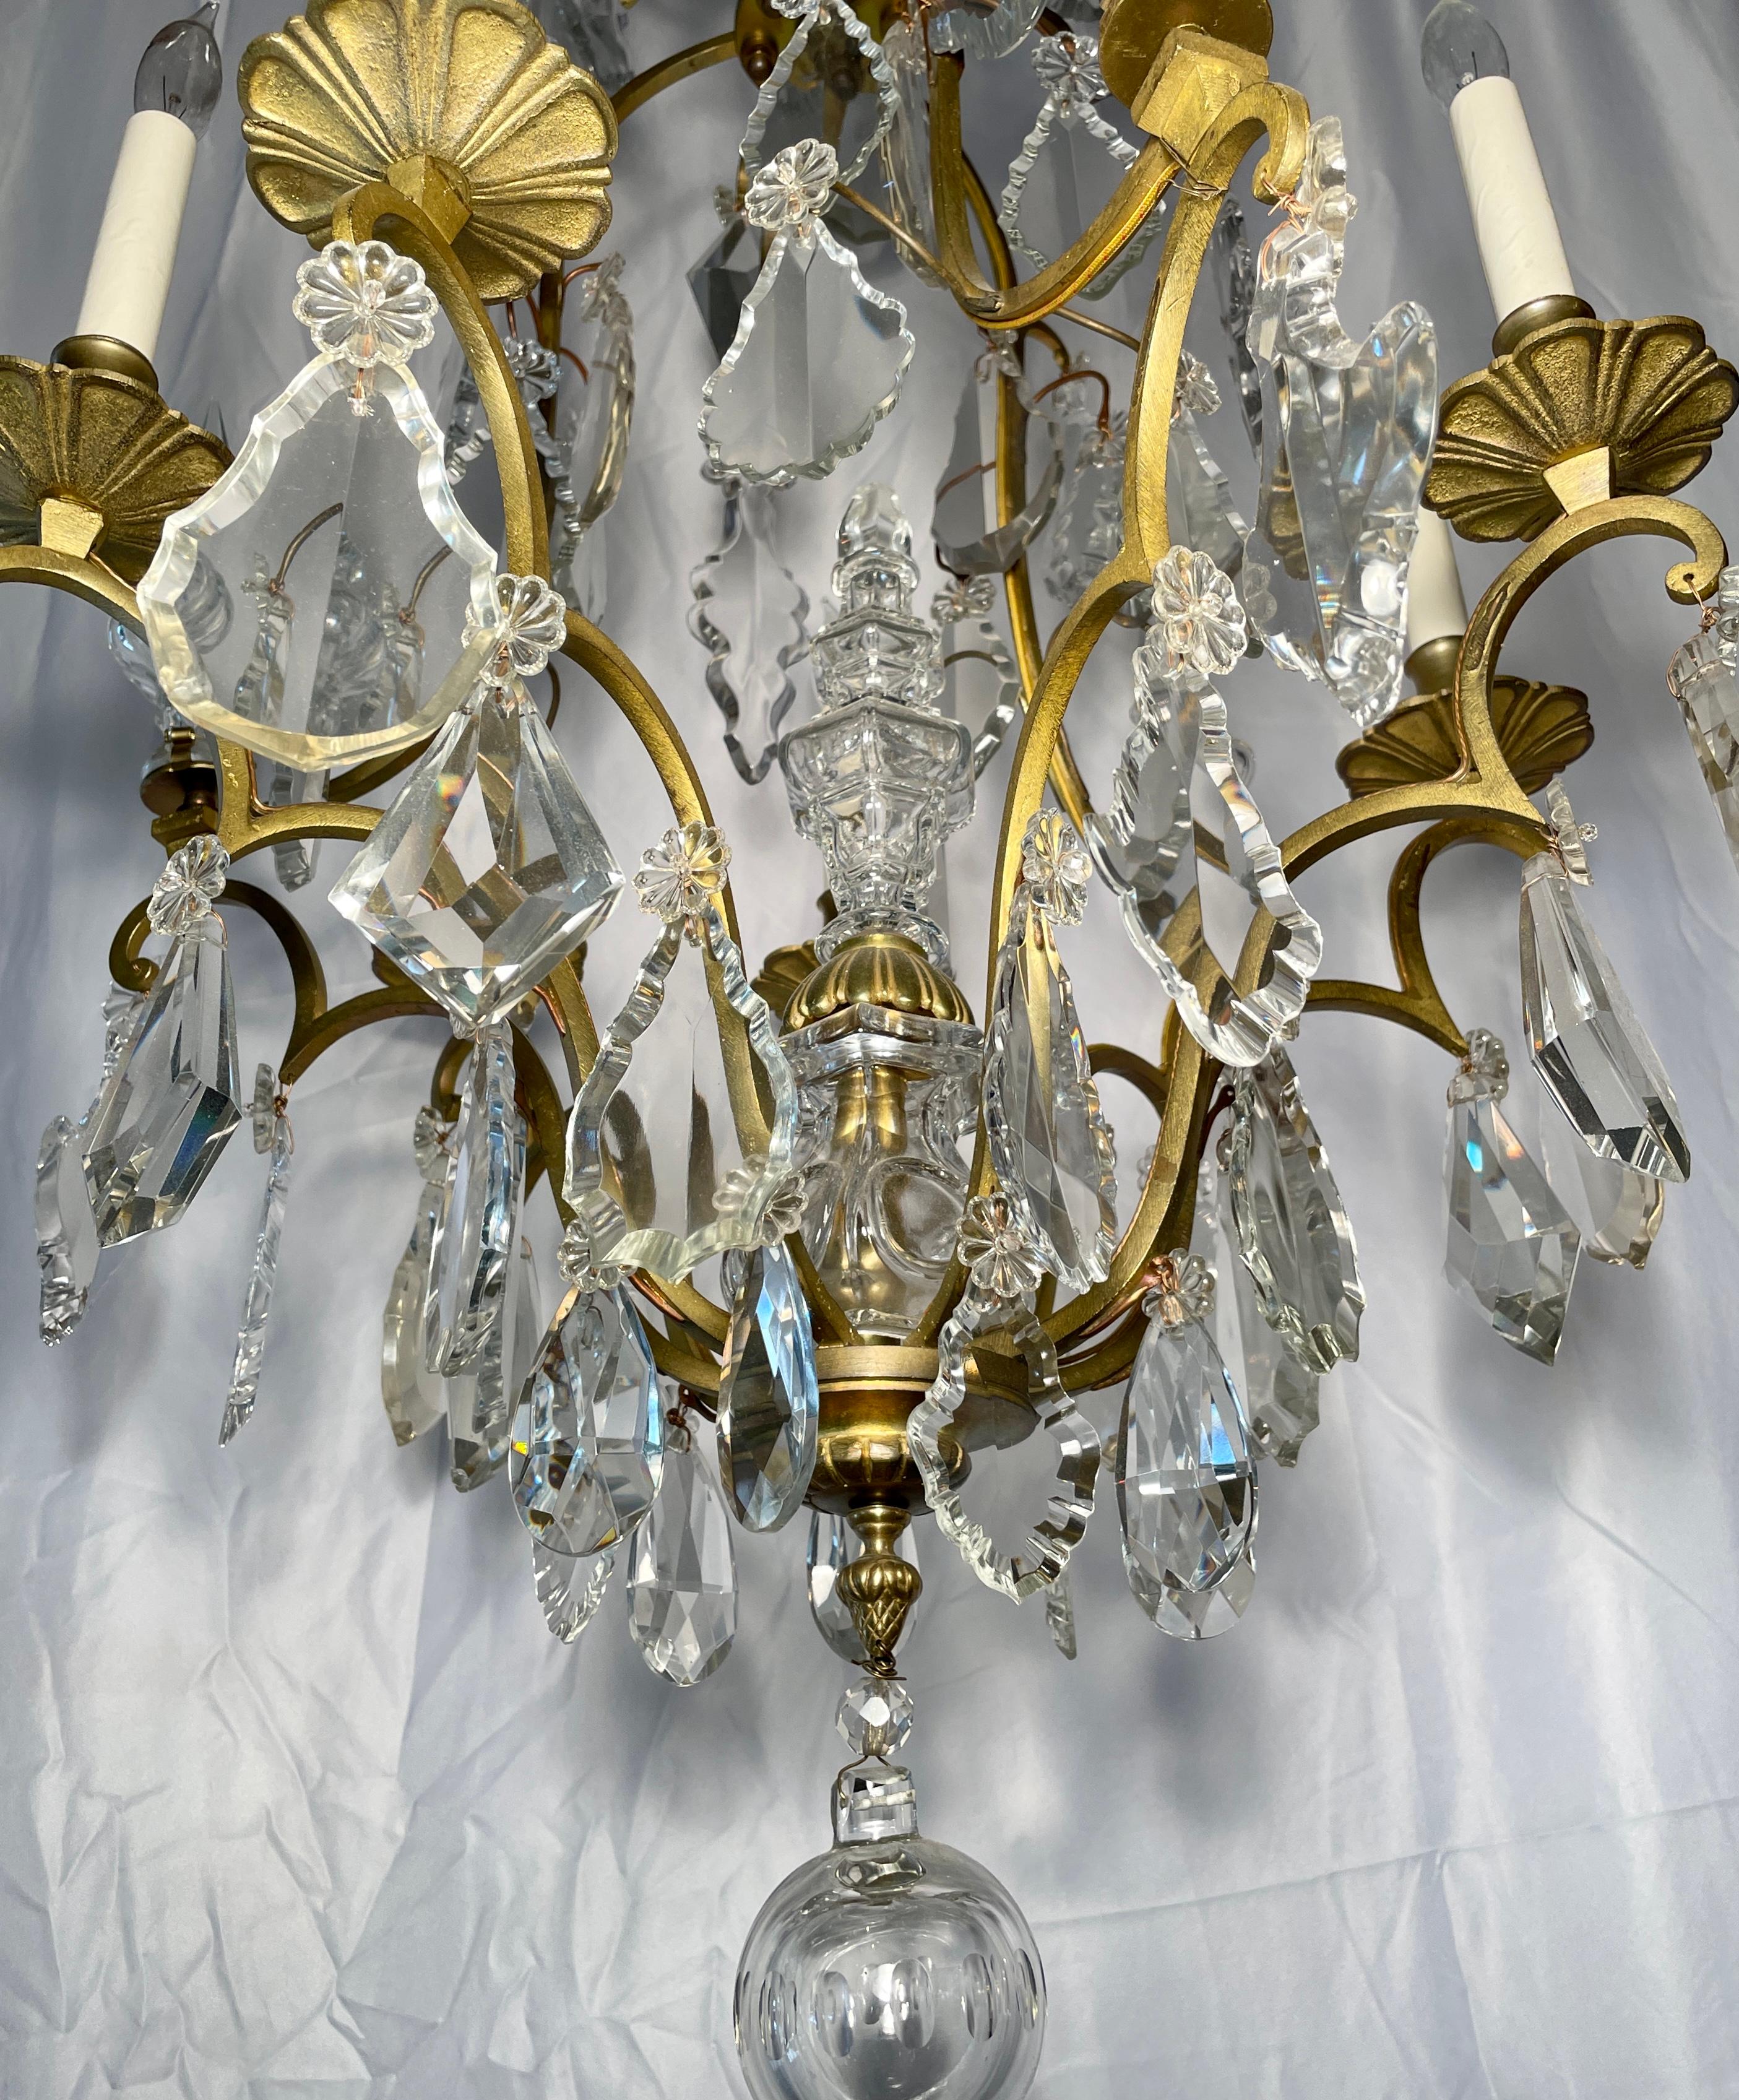 Antique French Baccarat Crystal and Bronze D' Ore Chandelier, circa 1880-1890 In Good Condition For Sale In New Orleans, LA